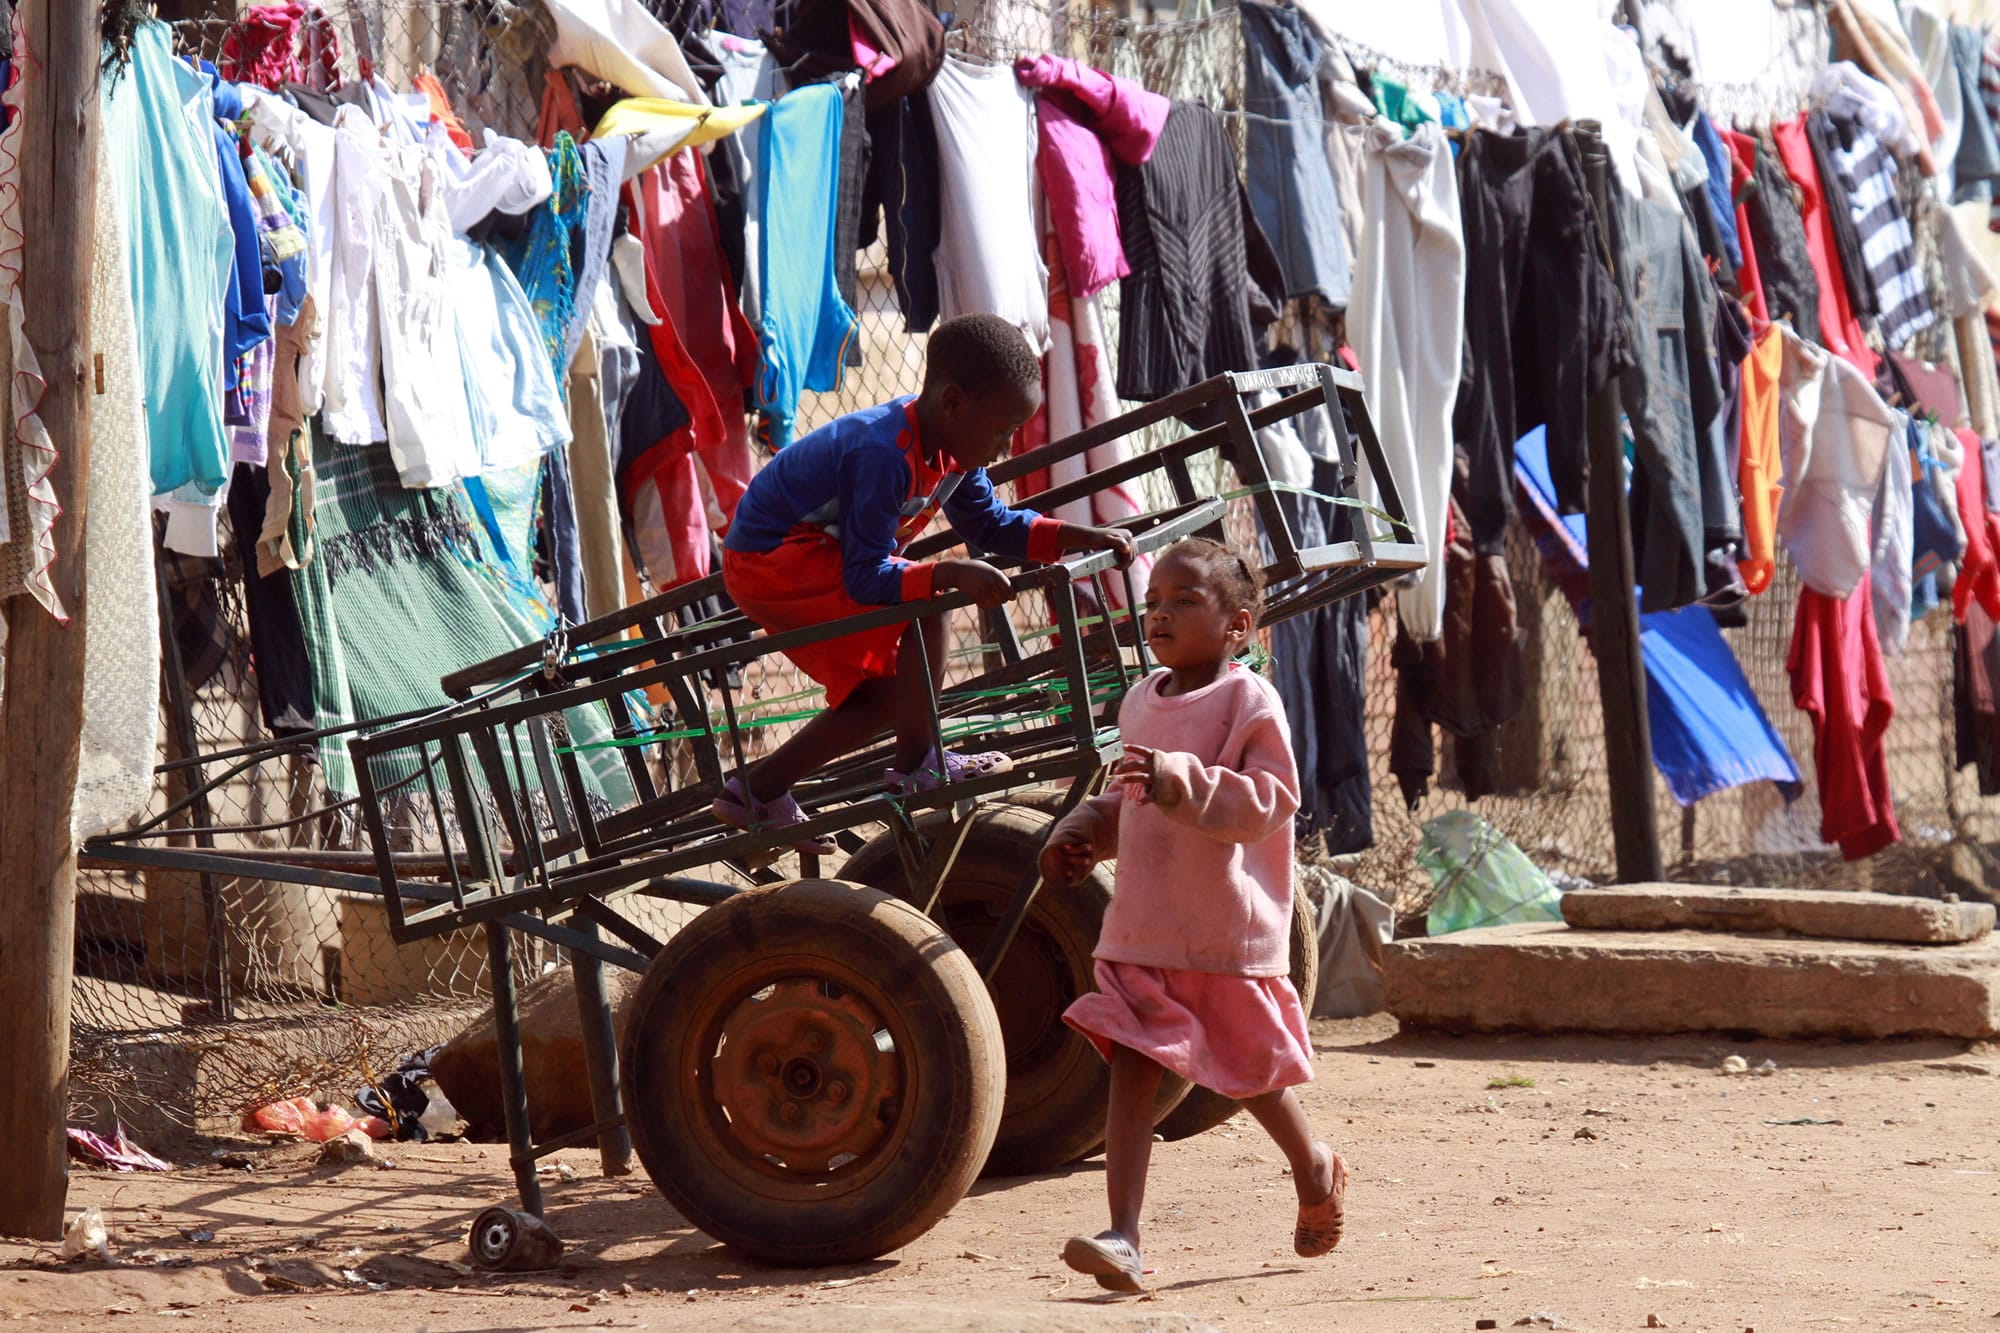 Children play near laundry hanging on a line in Mbare, Harare on Thursday.